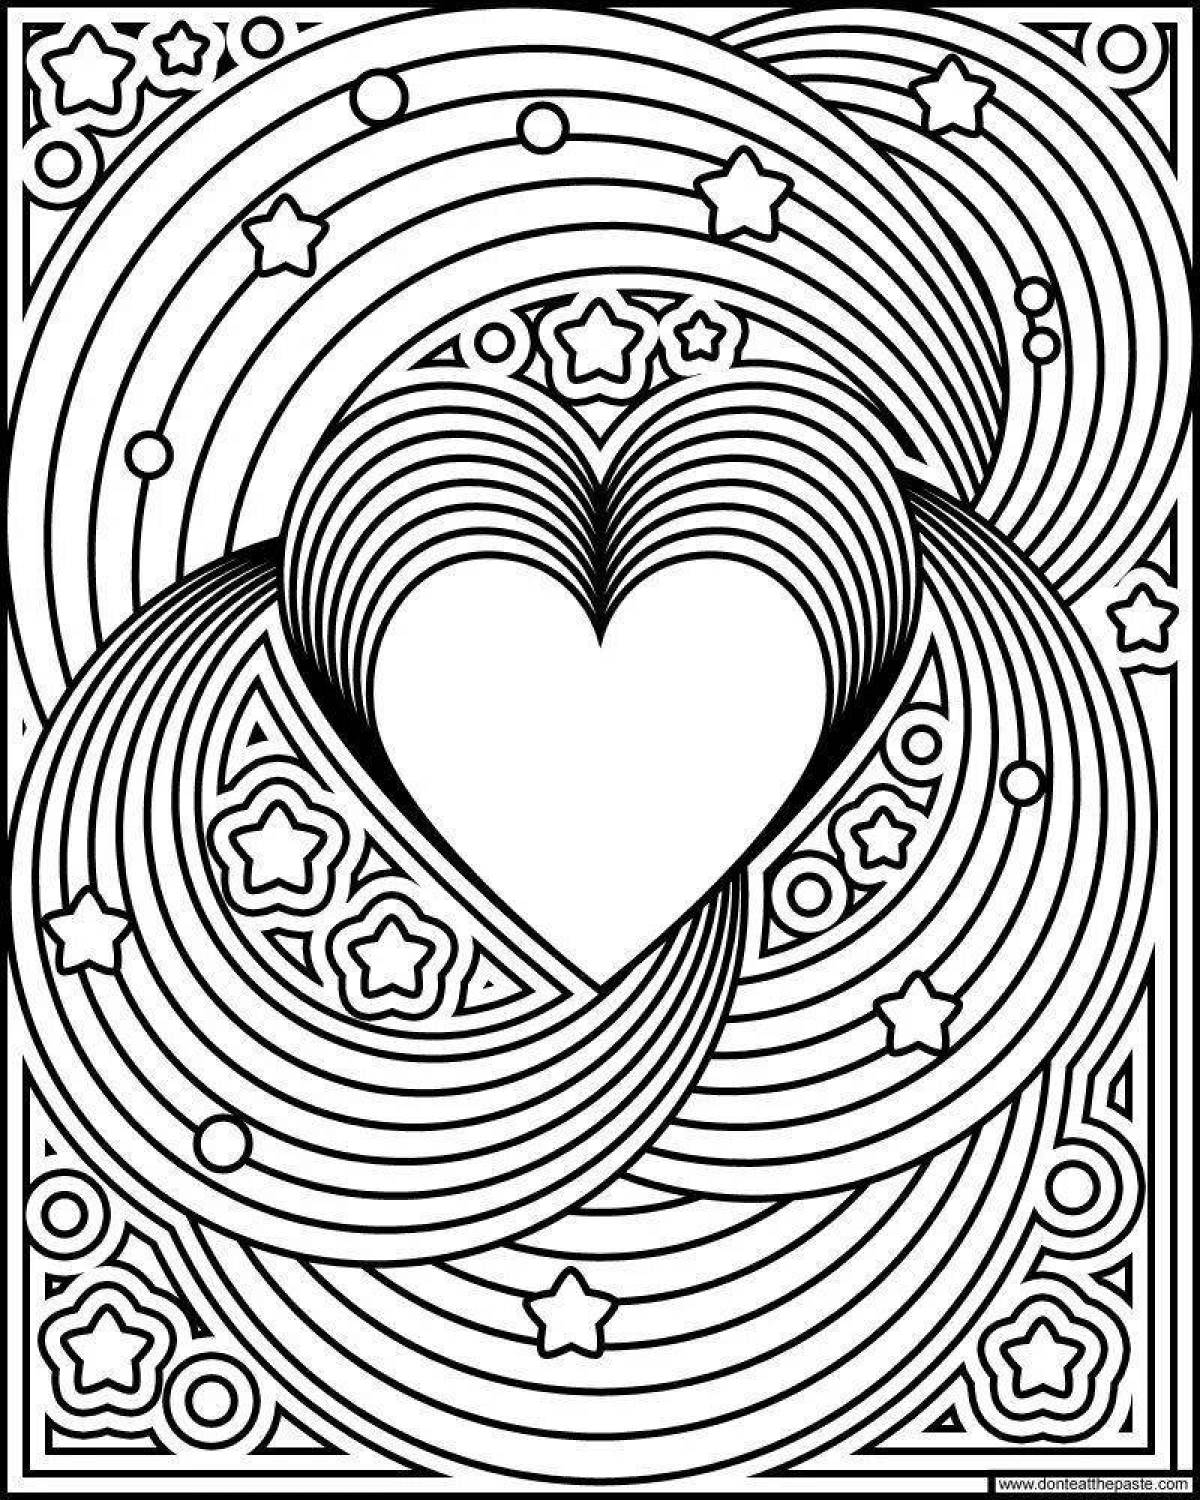 Blissful love antistress coloring book